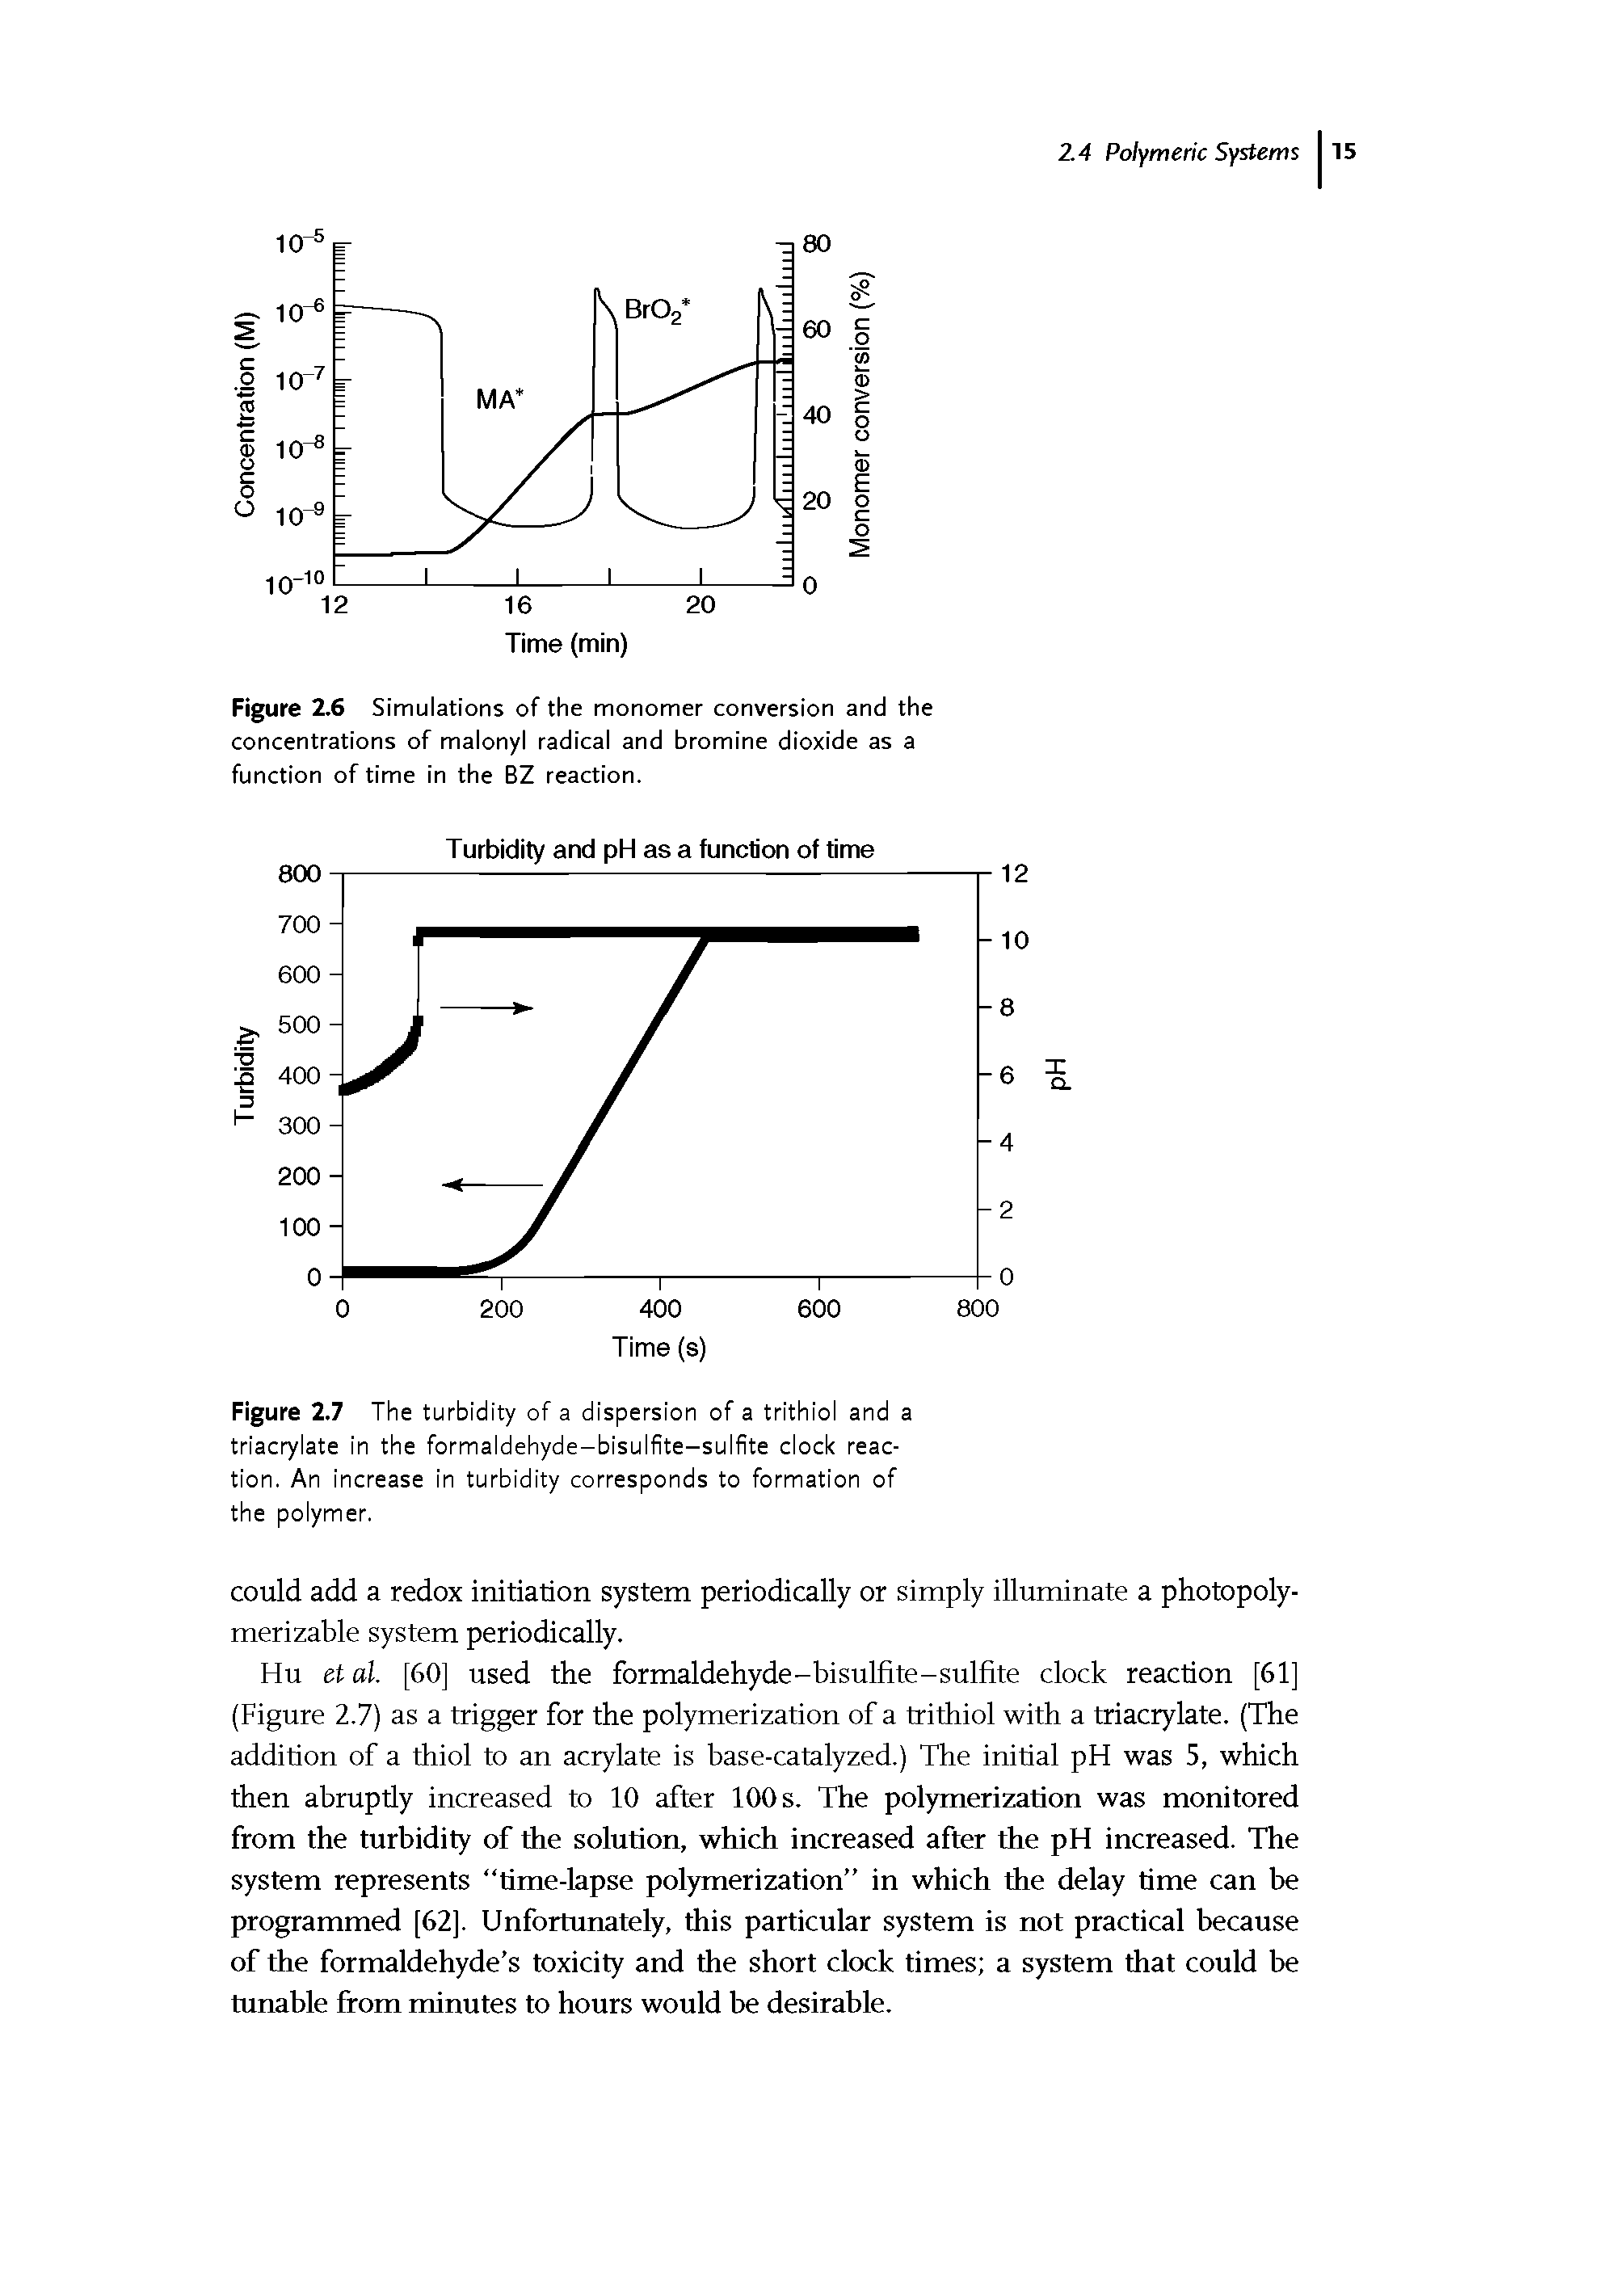 Figure 2.7 The turbidity of a dispersion of a trithiol and a triac late in the formaldehyde-bisulfite-sulfite clock reaction. An increase in turbidity corresponds to formation of the polymer.